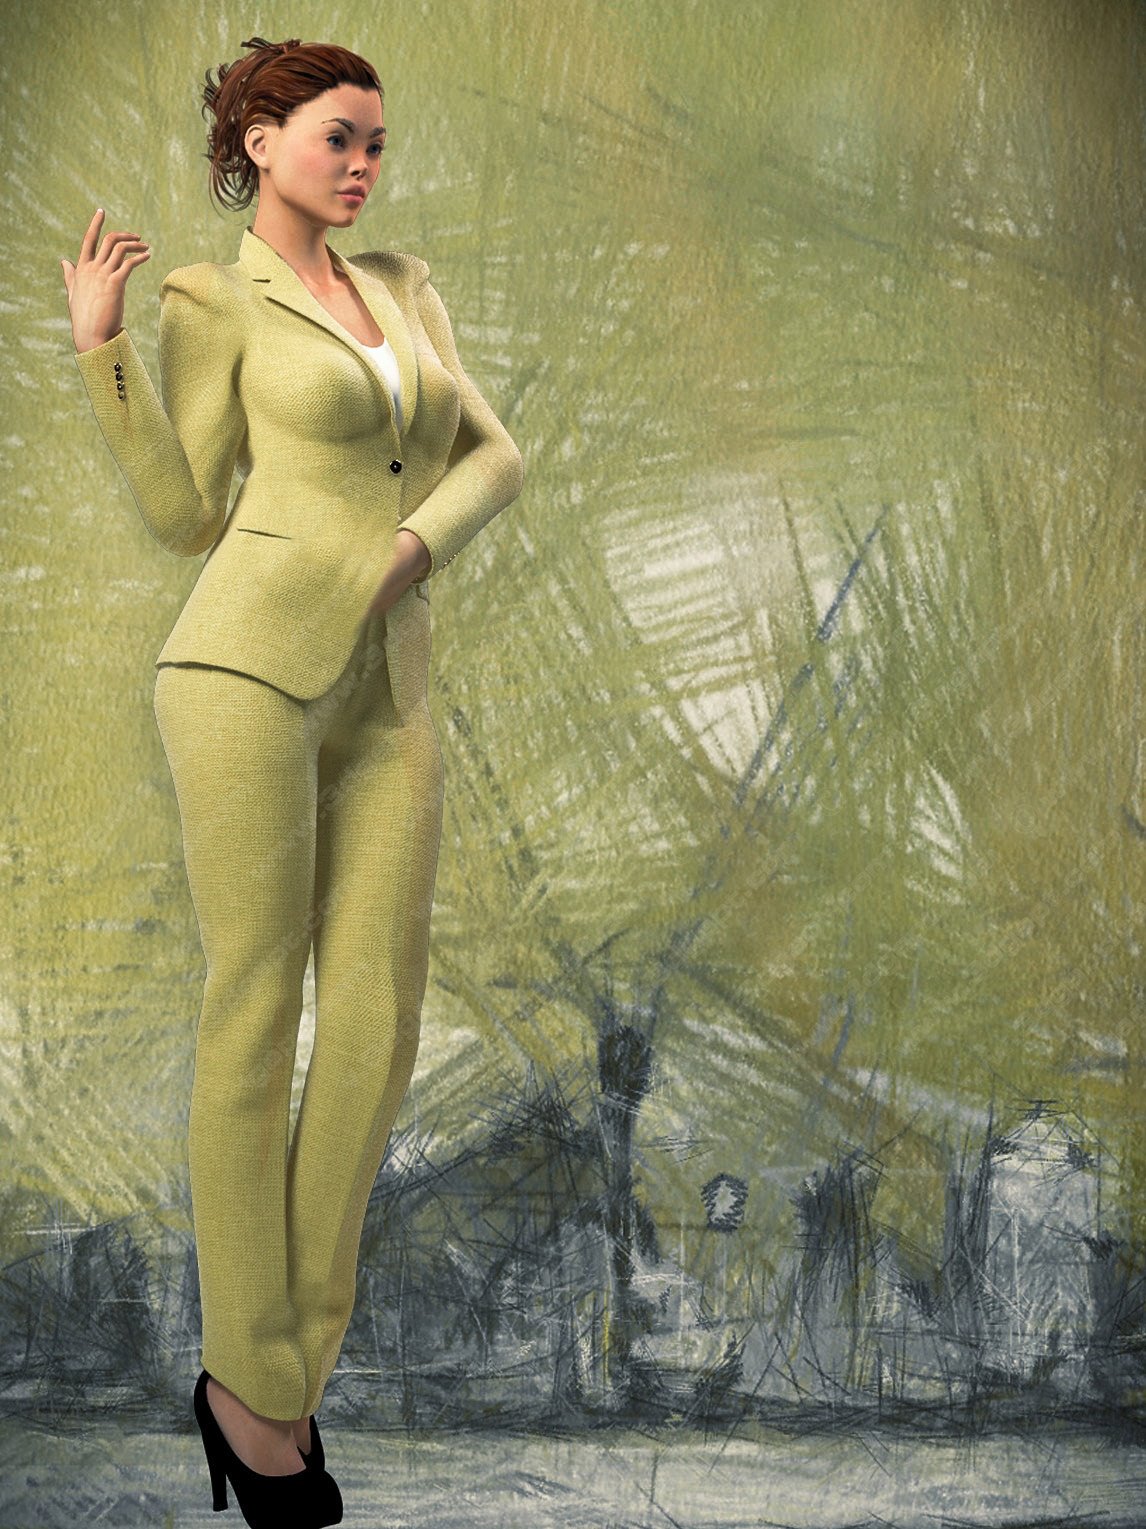 Woman in dress and suit 7